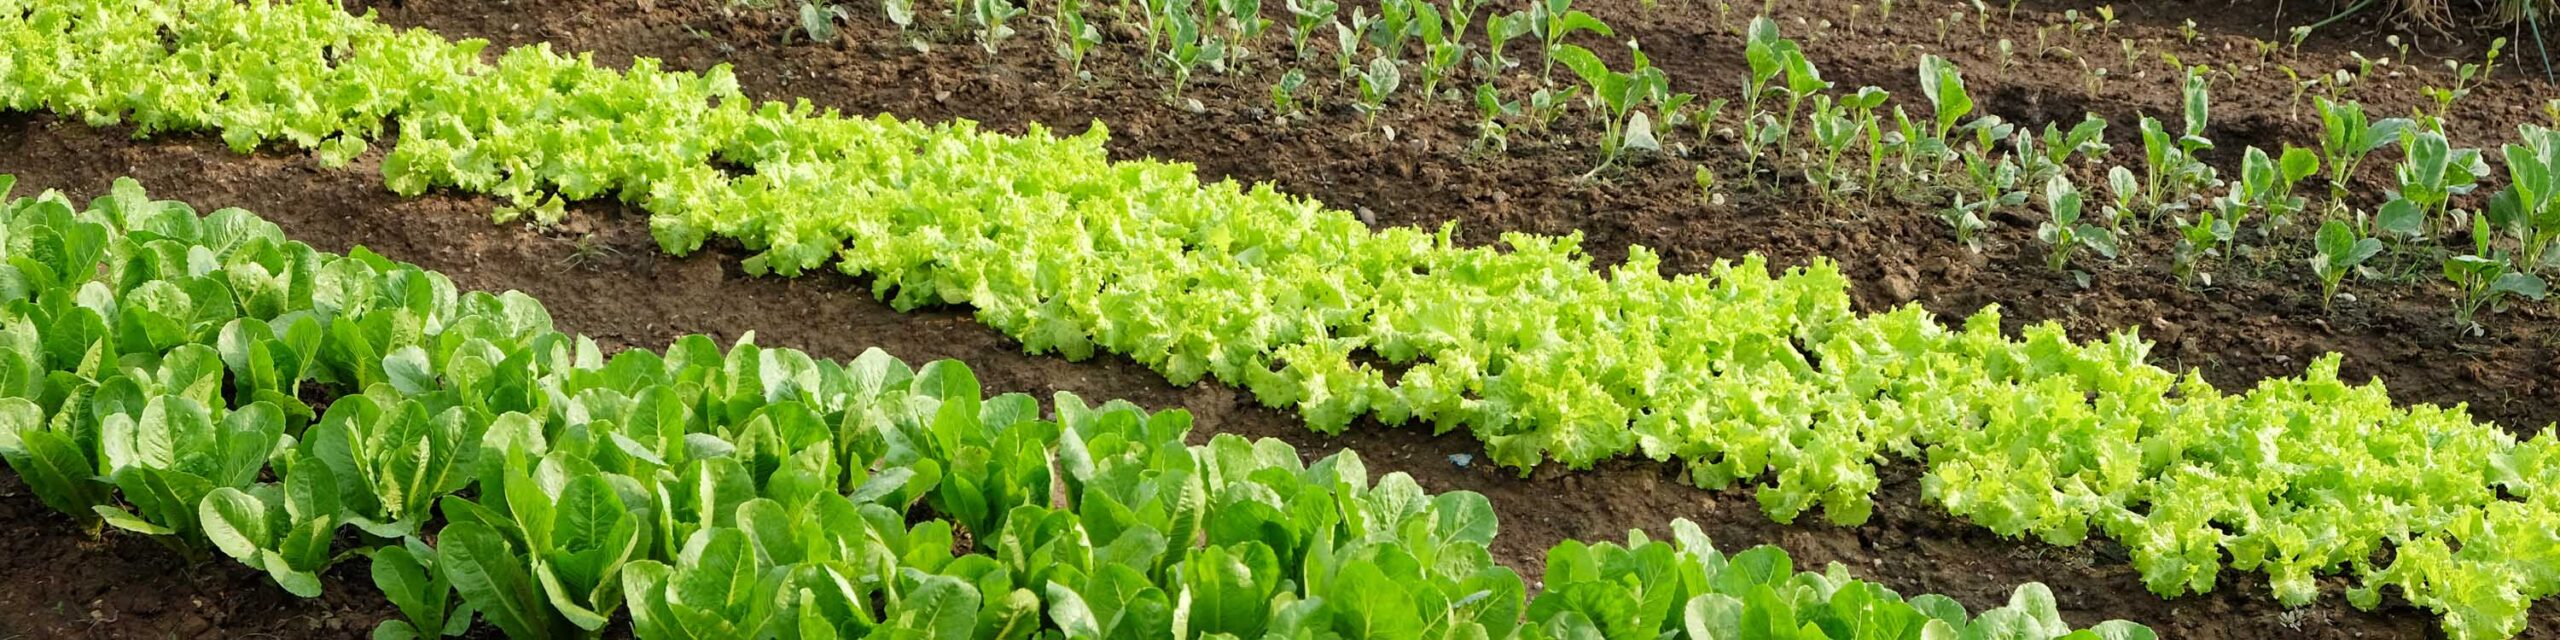 An organic vegetable garden featuring lettuce and other leafy greens.